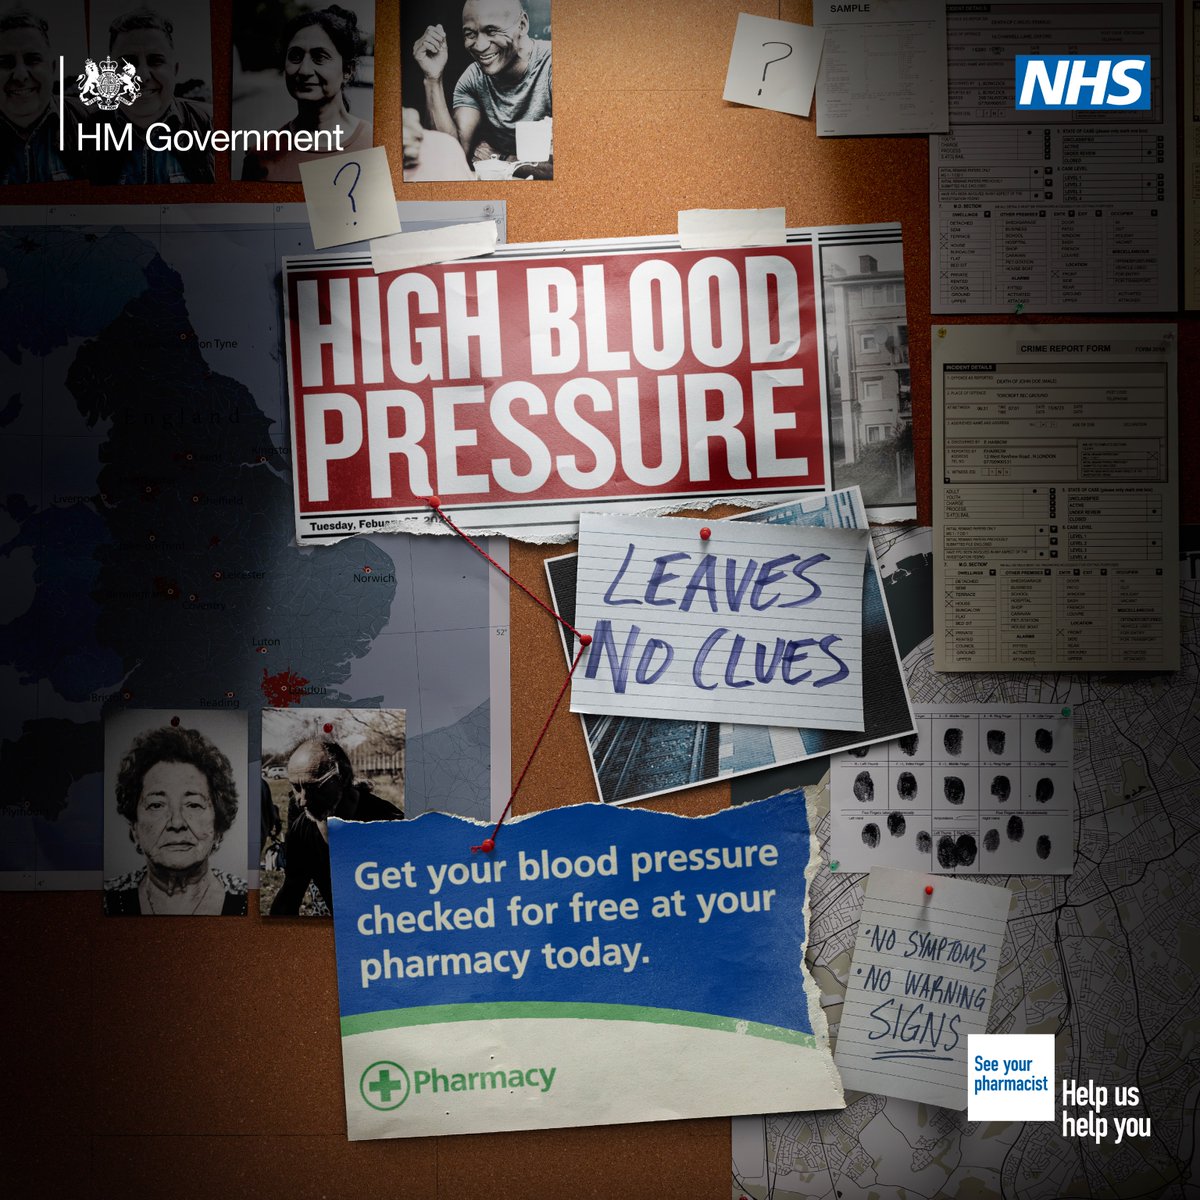 High blood pressure usually has no symptoms, but your pharmacist can detect it. For your free NHS blood pressure check, just go to your pharmacy today. Think pharmacy first. Must be 40 years or older and live in England, eligibility criteria apply. ➡️ nhs.uk/nhs-services/p…